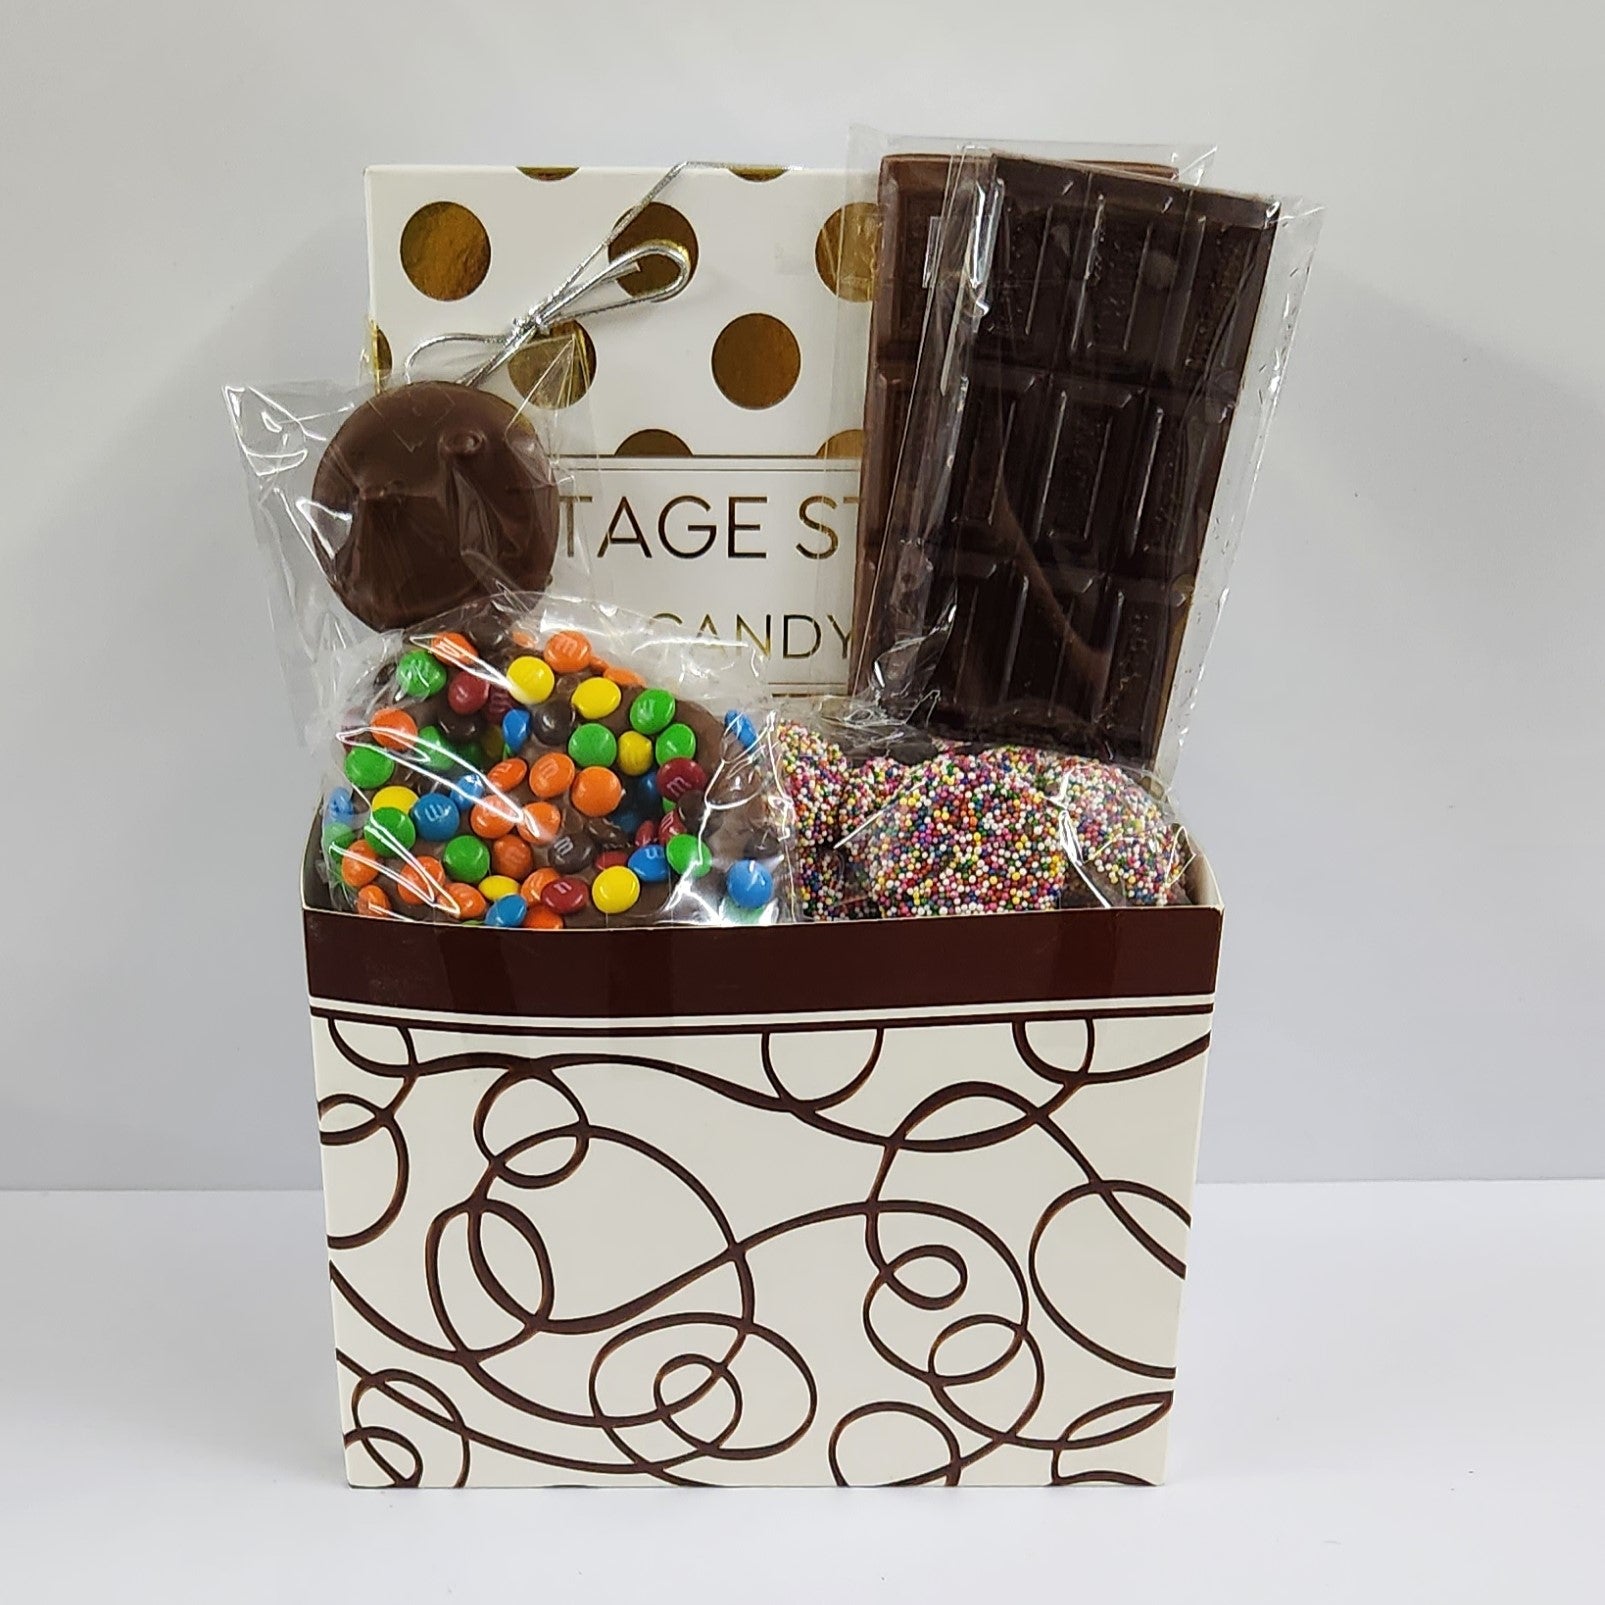 All Occasion Chocolate Drizzle Gift Basket includes Sweet Swirls Gift Baskets includes a 16-piece assortment of creams, caramels, meltaways and truffles, milk & dark chocolate candy bars, milk chocolate covered Oreos, milk chocolate nonpareils and a milk chocolate covered pretzels coated in mini M & M's. 